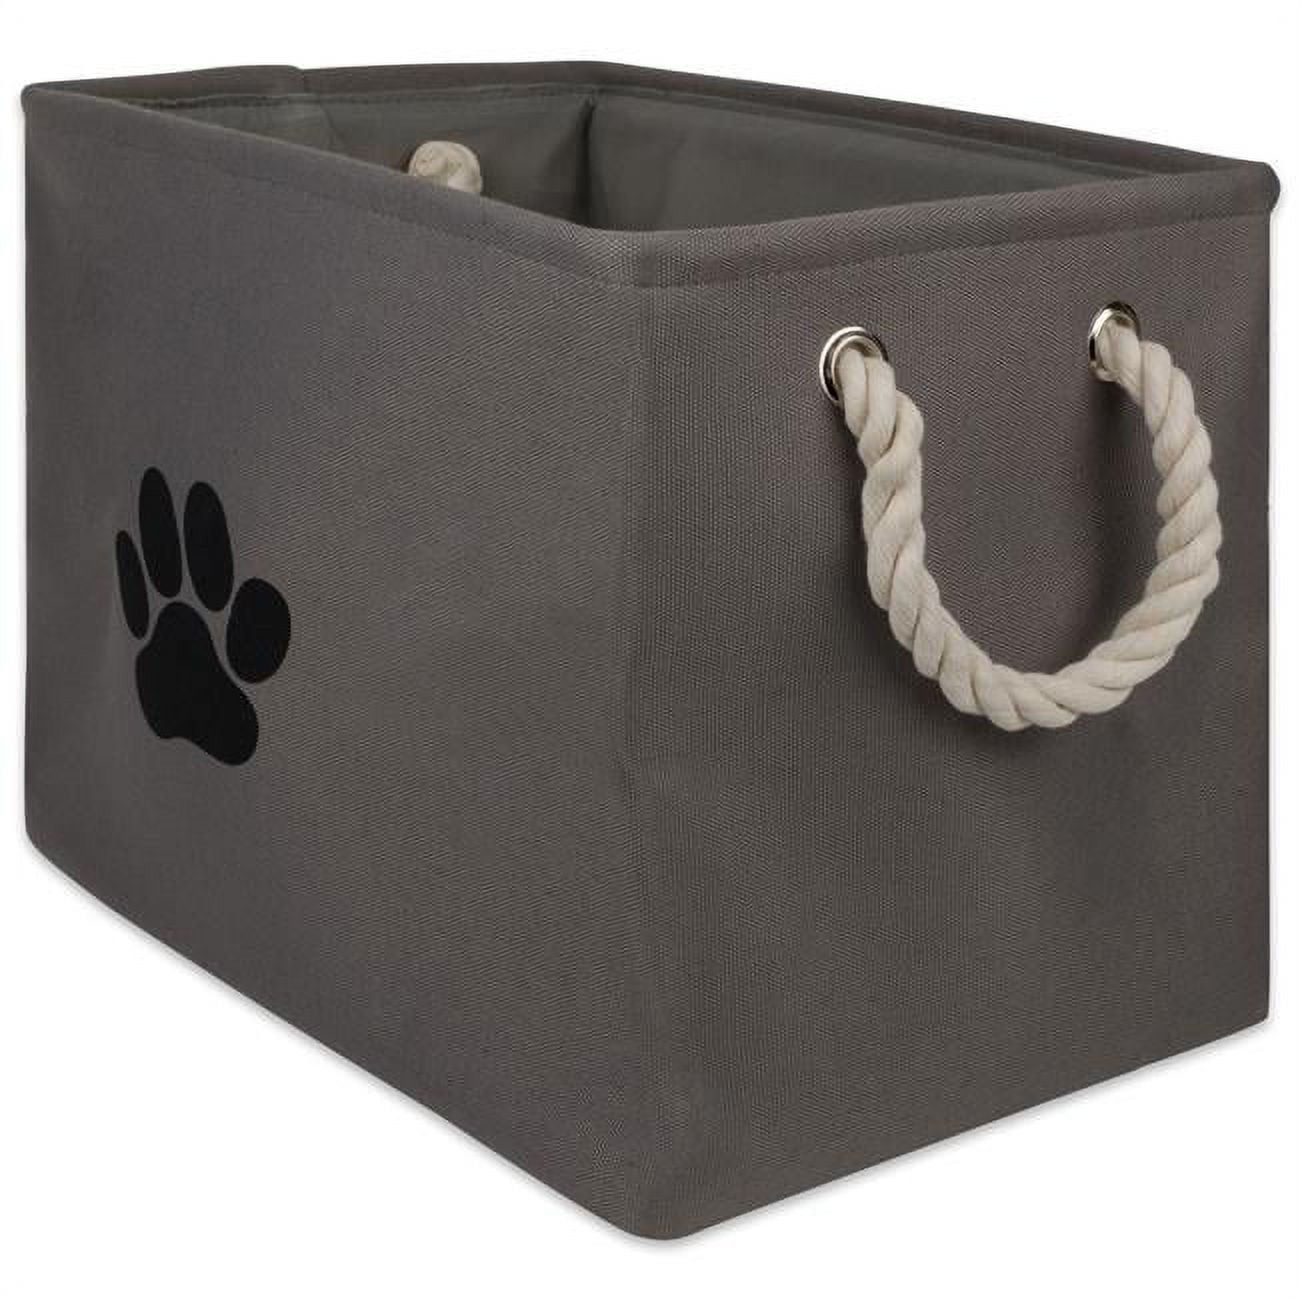 Design Imports Camz38656 14 X 8 X 9 In. Polyester Rectangle Pet Bin Paw, Grey - Small